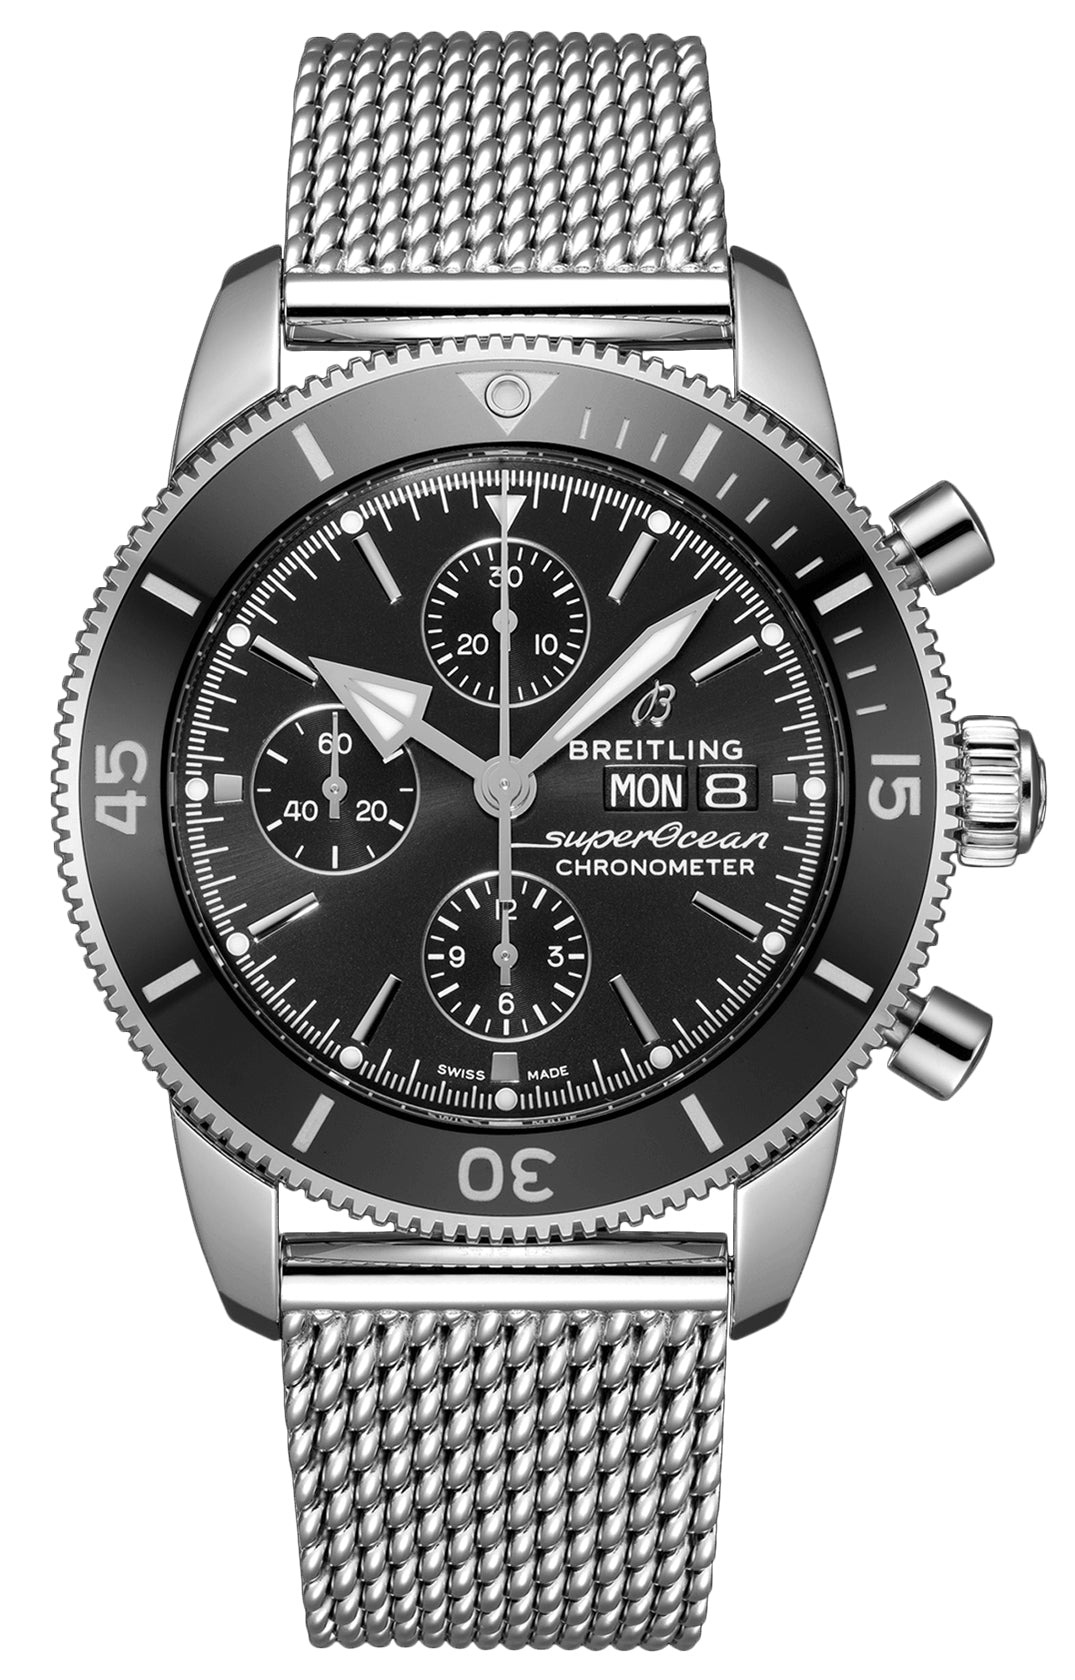 update alt-text with template Watches - Mens-Breitling-A13313121B1A1-40 - 45 mm, black, Breitling, chronograph, compass, COSC, date, day, divers, mens, menswatches, new arrivals, round, seconds sub-dial, special / limited edition, stainless steel band, stainless steel case, Superocean Heritage, swiss automatic, uni-directional rotating bezel, watches-Watches & Beyond